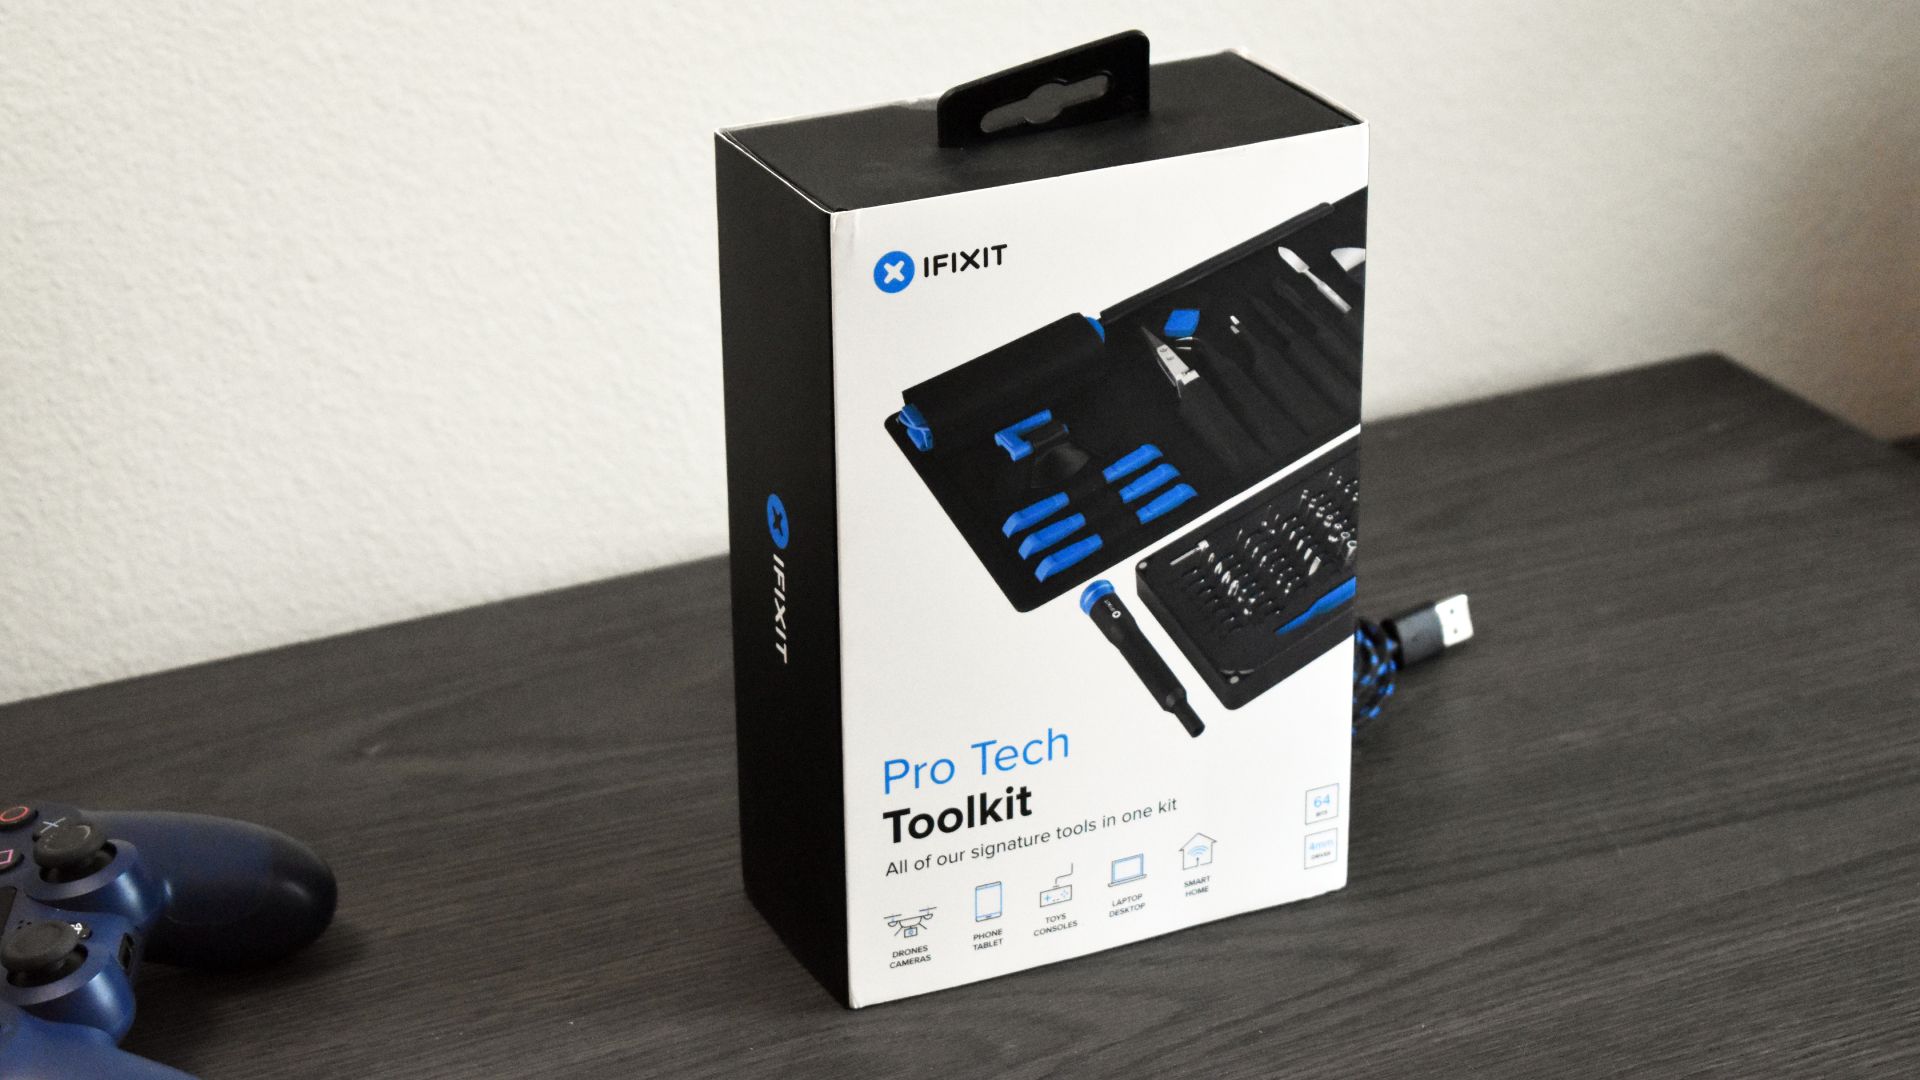 iFixit Pro Tech Toolkit on mantle next to PS4 controller